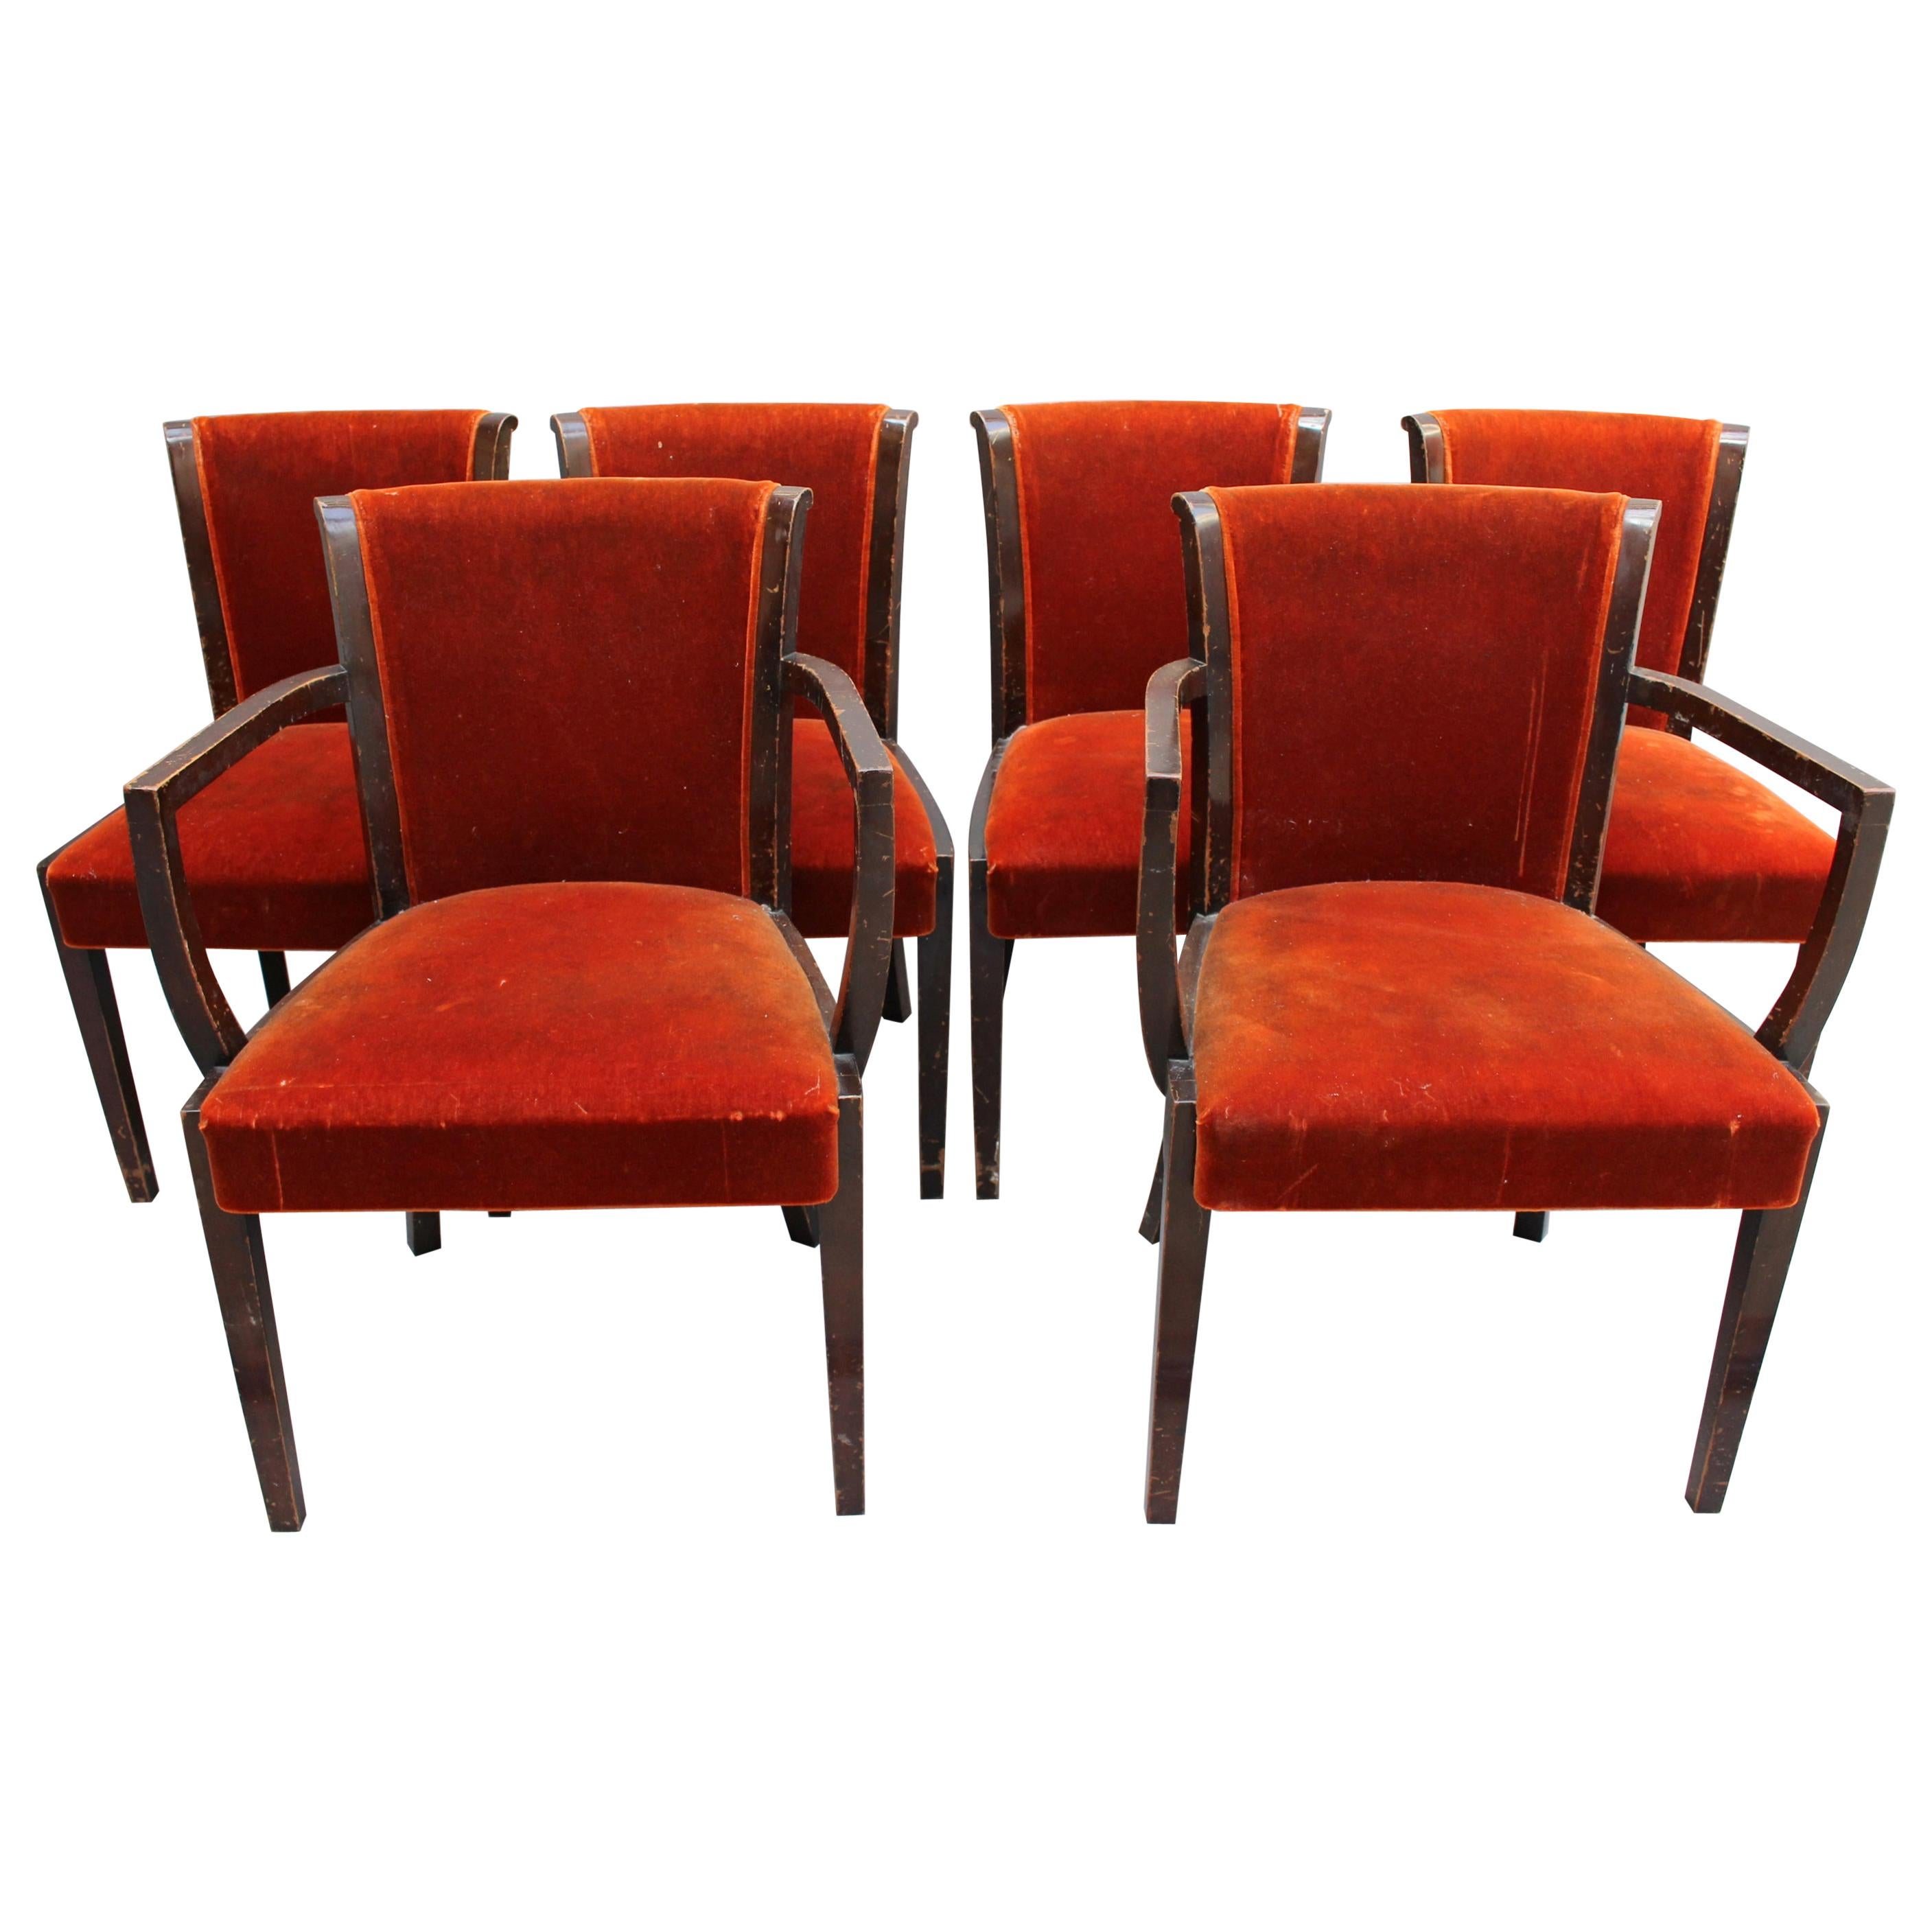 Set of 6 Fine Belgium Art Deco Chairs by De Coene (4 Side and 2 Arm) For Sale